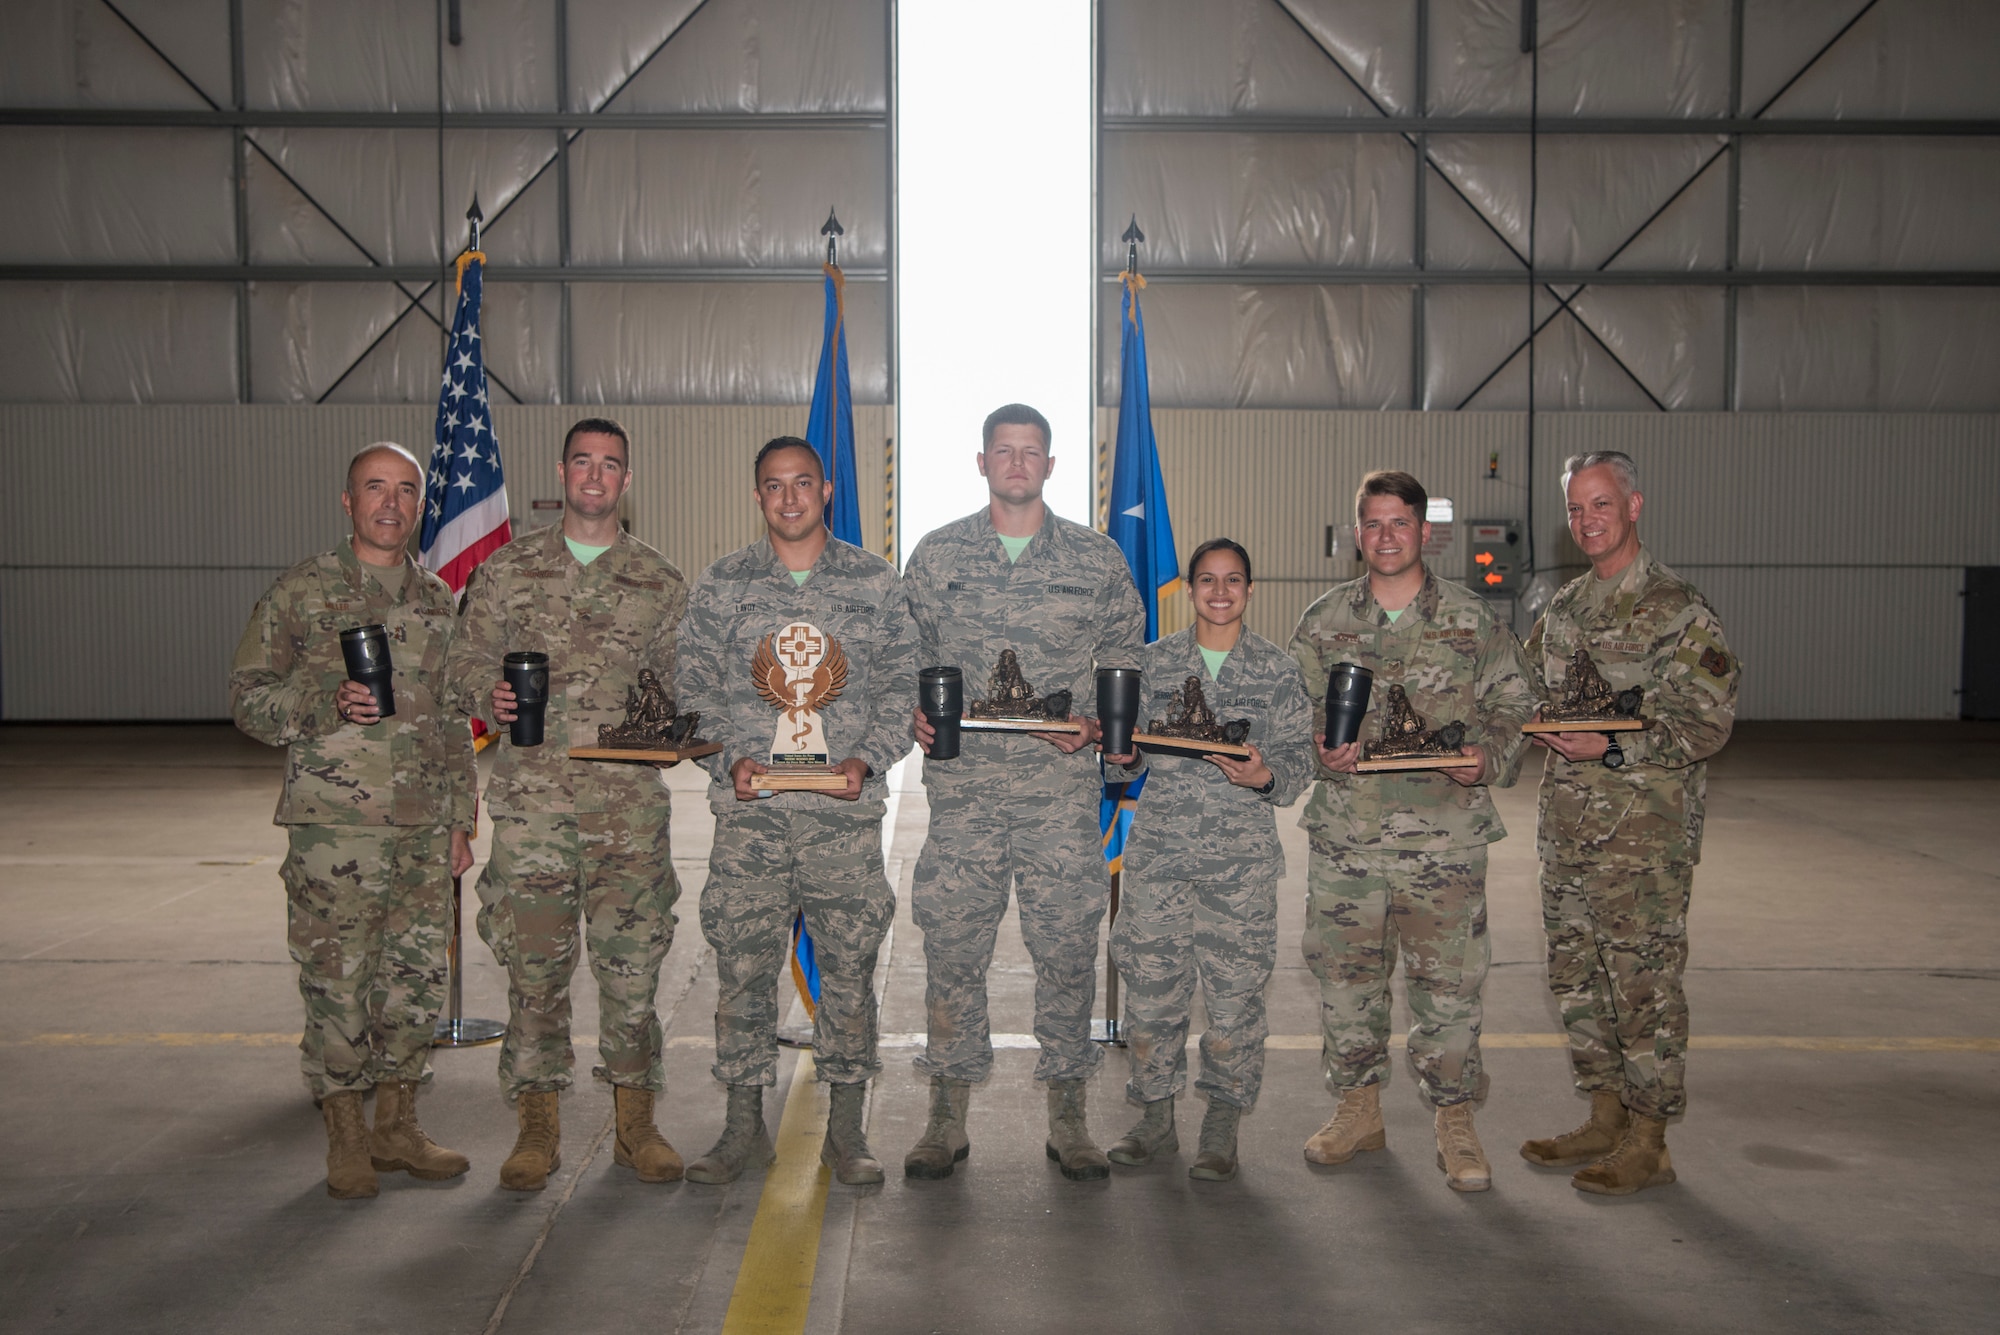 Medical technicians from Hurlburt Field, Fla., hold their trophies after winning first place at the 2019 Medical Rodeo closing ceremonies at Cannon Air Force Base, N.M., Sept. 20, 2019. A total of 19 medical teams from around the world competed in the rodeo, which is designed to test and improve their skills in both deployed and home installation environments. (U.S. Air Force photo by Staff Sgt. Michael Washburn)